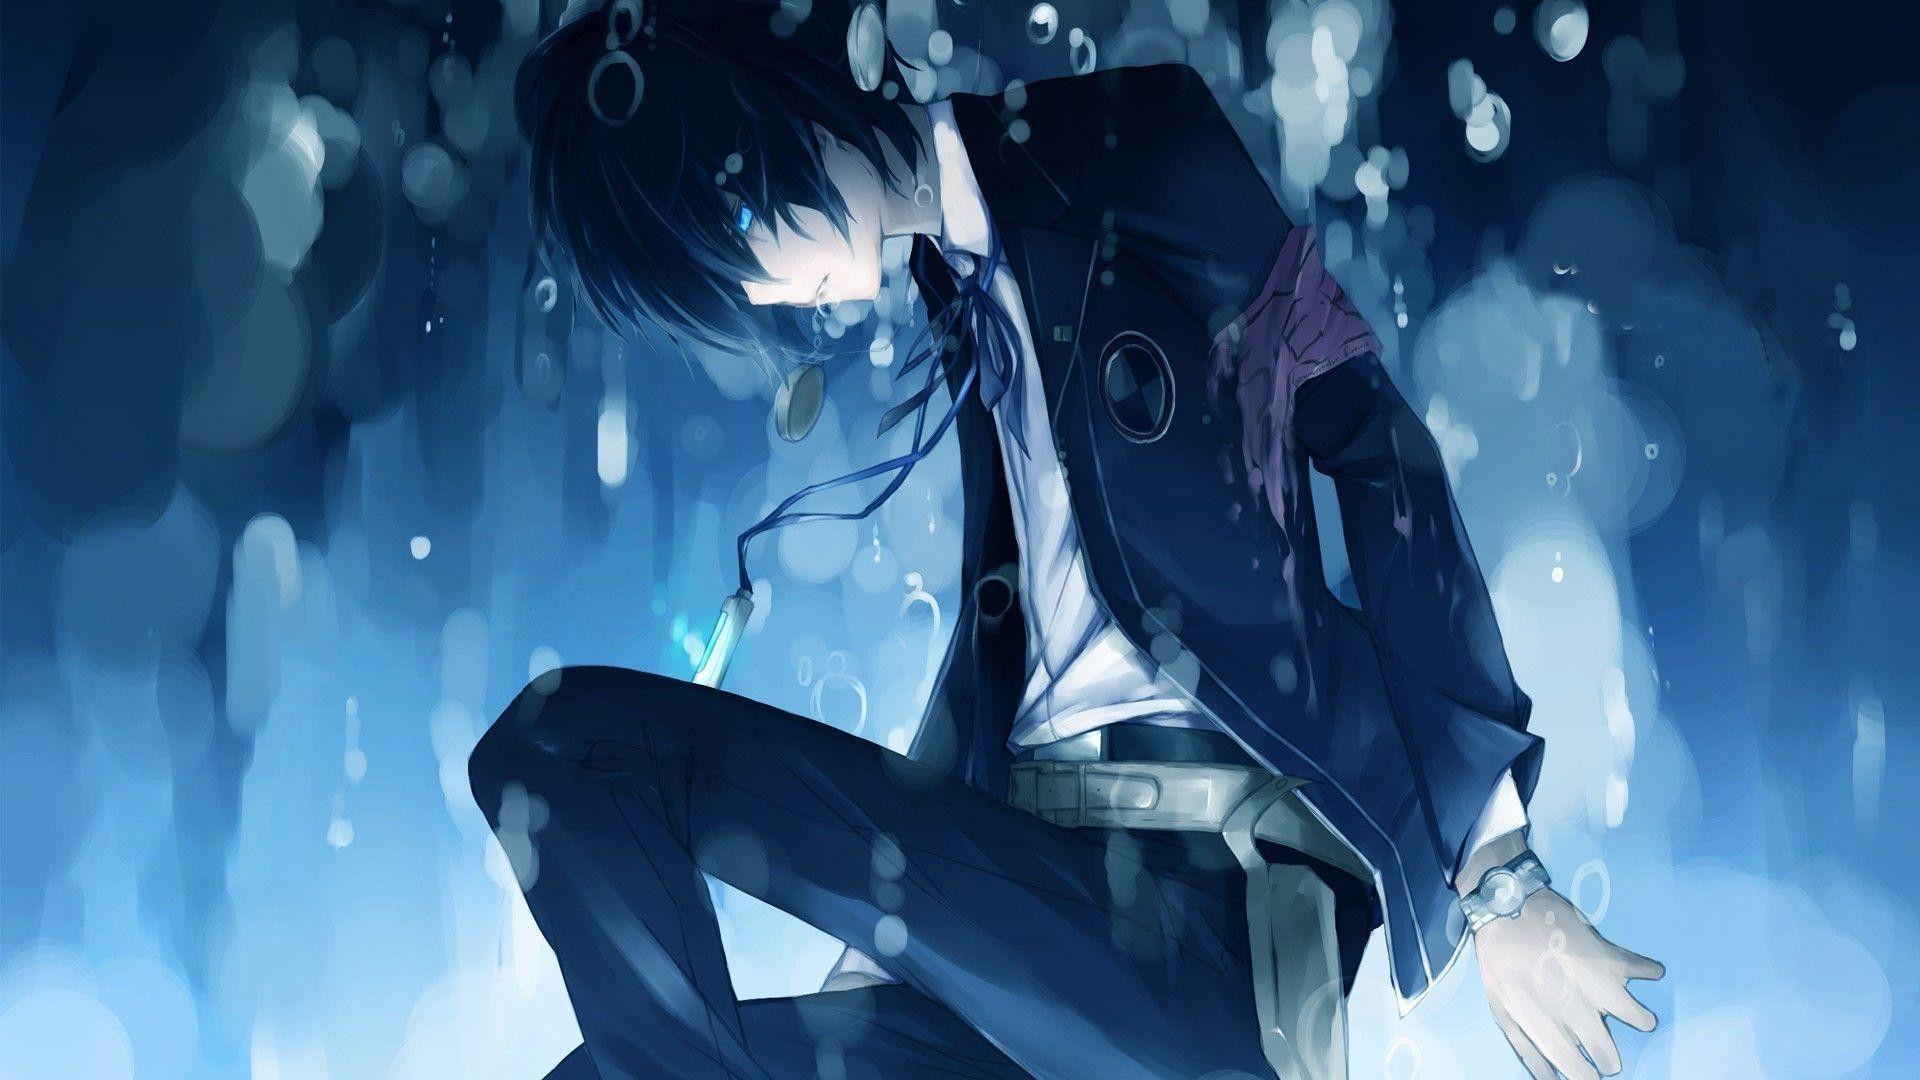 Anime Emo Characters Wallpapers Wallpaper Cave Just a collection of aesthetic anime profile pics and icons that you could use for your profile. anime emo characters wallpapers